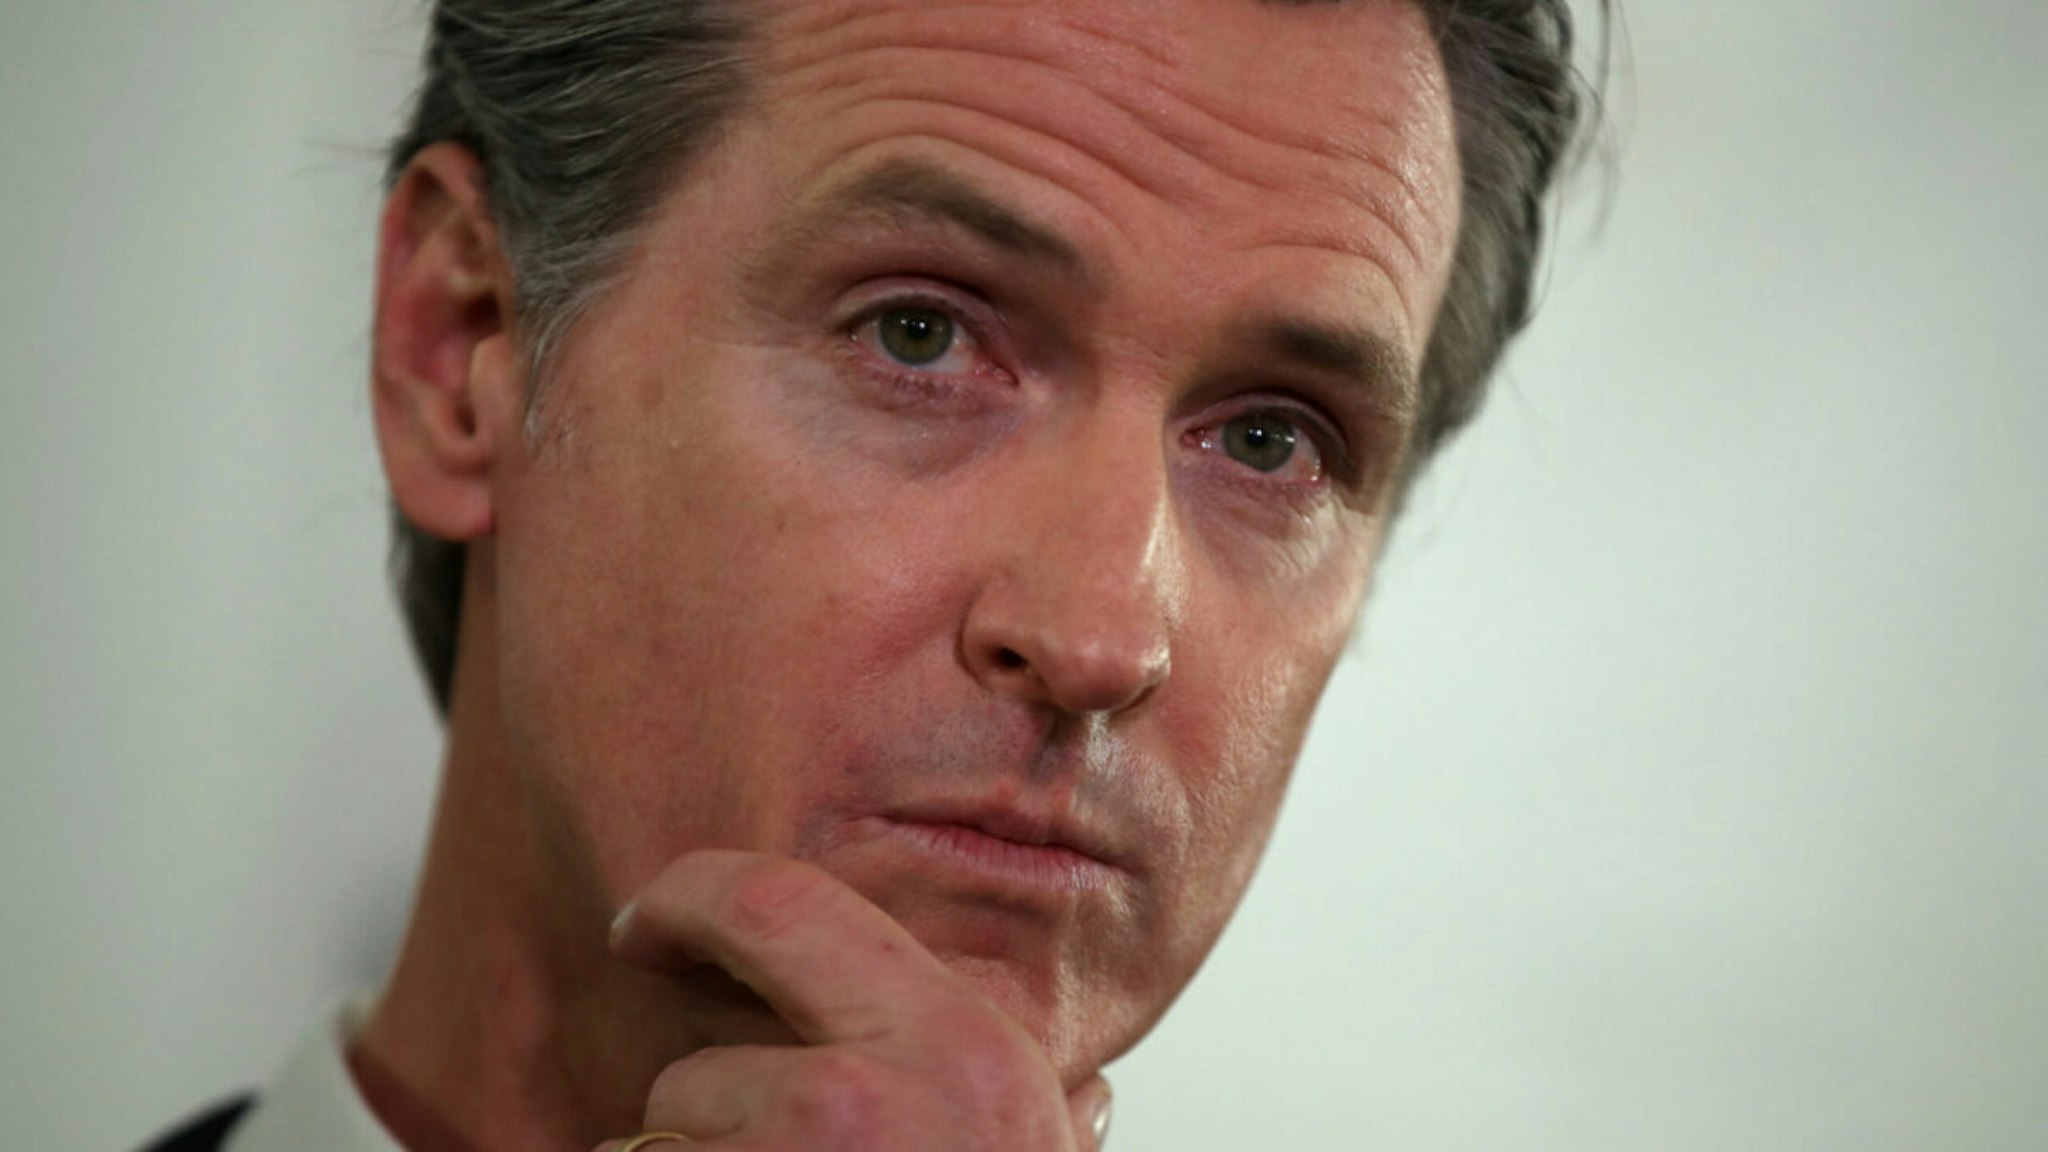 California Gov. Gavin Newsom looks on during a a news conference about the state's efforts on the homelessness crisis on January 16, 2020 in Oakland, California.